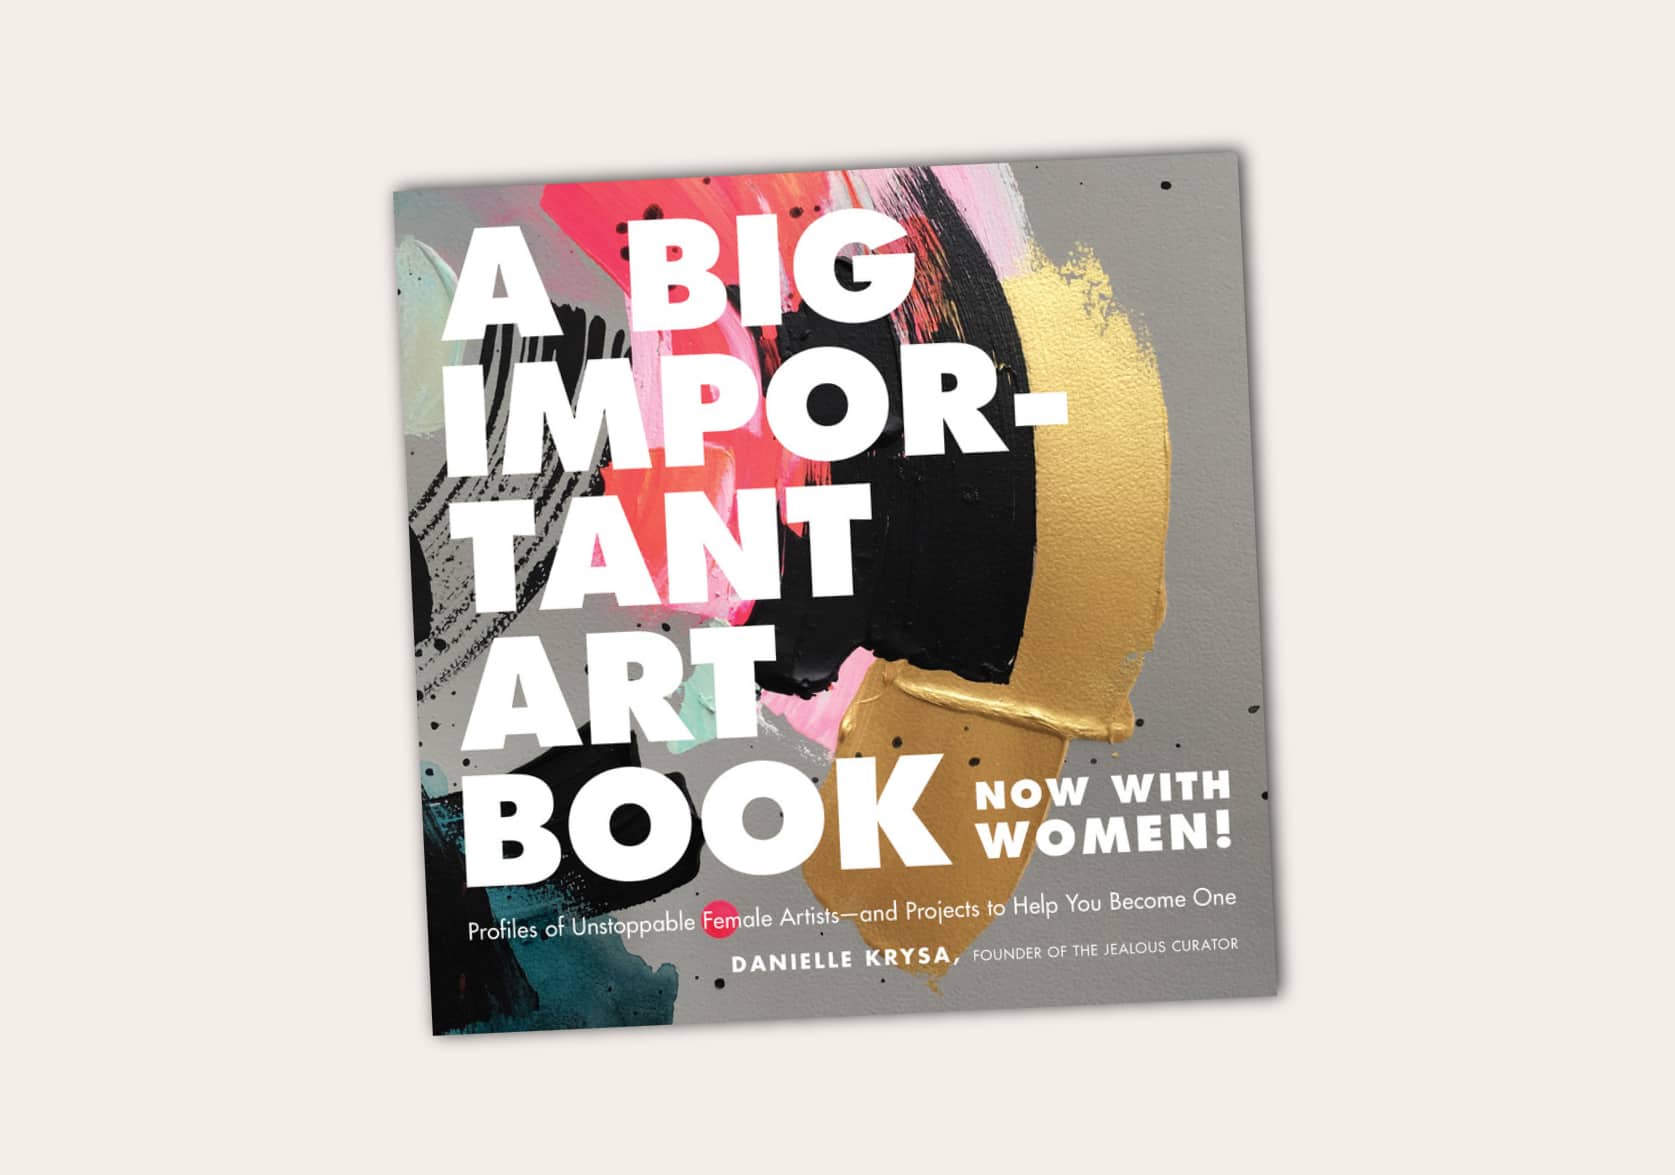 A Big Important Art Book (Now with Women): Profiles of Unstoppable Female Artists - and Projects to Help You Become One by Danielle Krysa